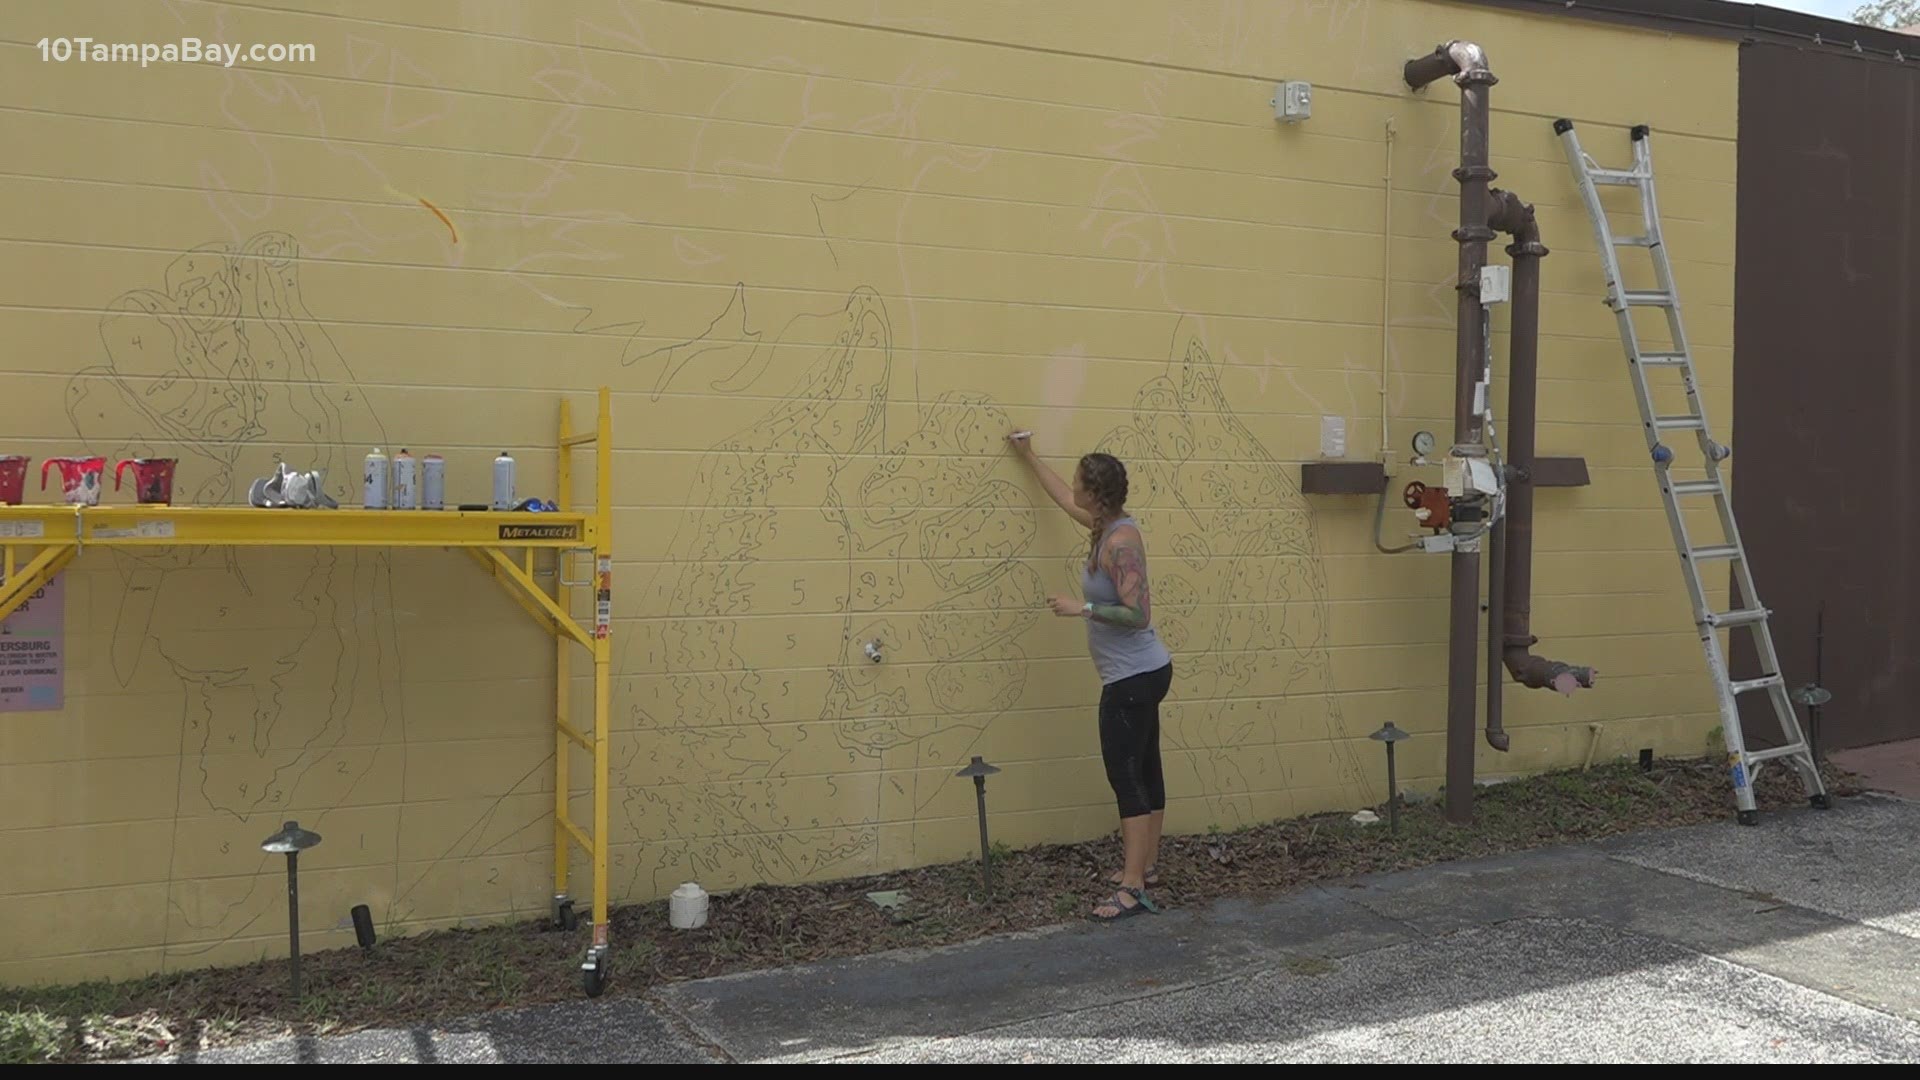 Braden and Alyssa expected a few dozen volunteers to help them paint a sunflower mural designed to bring unity to St. Pete. They got over 200 requests to help paint.